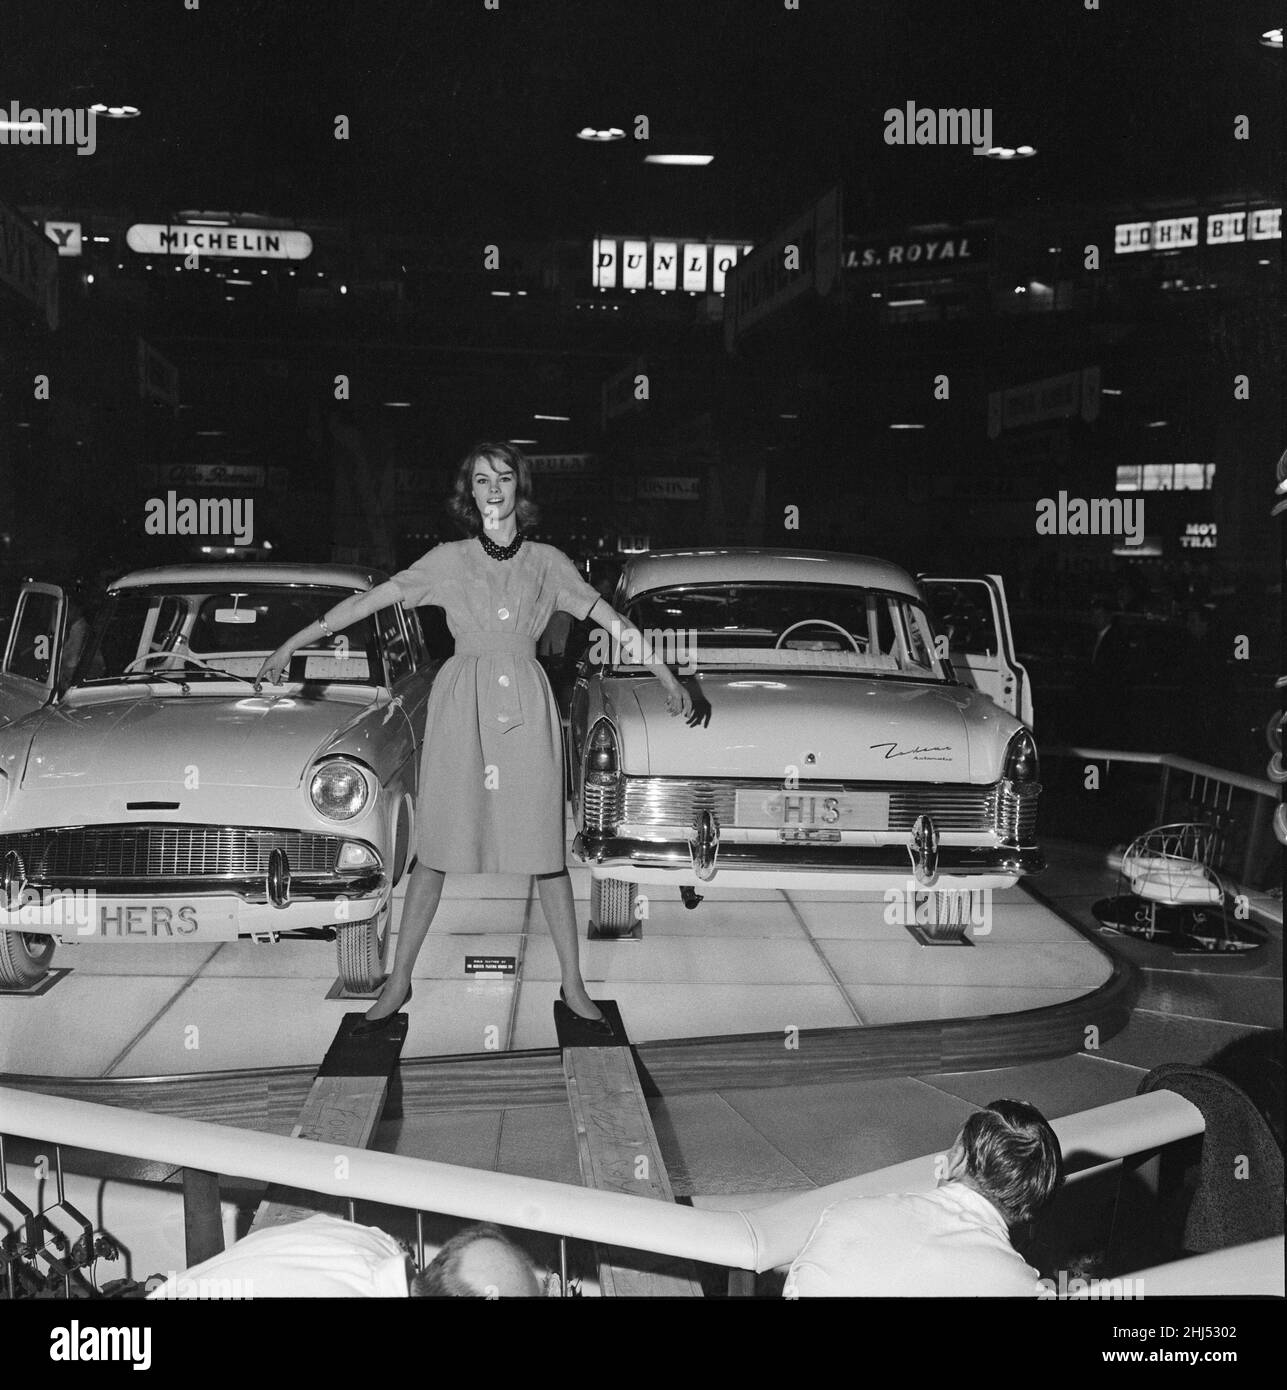 Jean Shrimpton, model and actress pictured here atThe Motor Show in Earls Court, London, in  1960.  Jean is posing between his and her Ford Zodiac Cars.  Picture taken 18th October 1960 Stock Photo